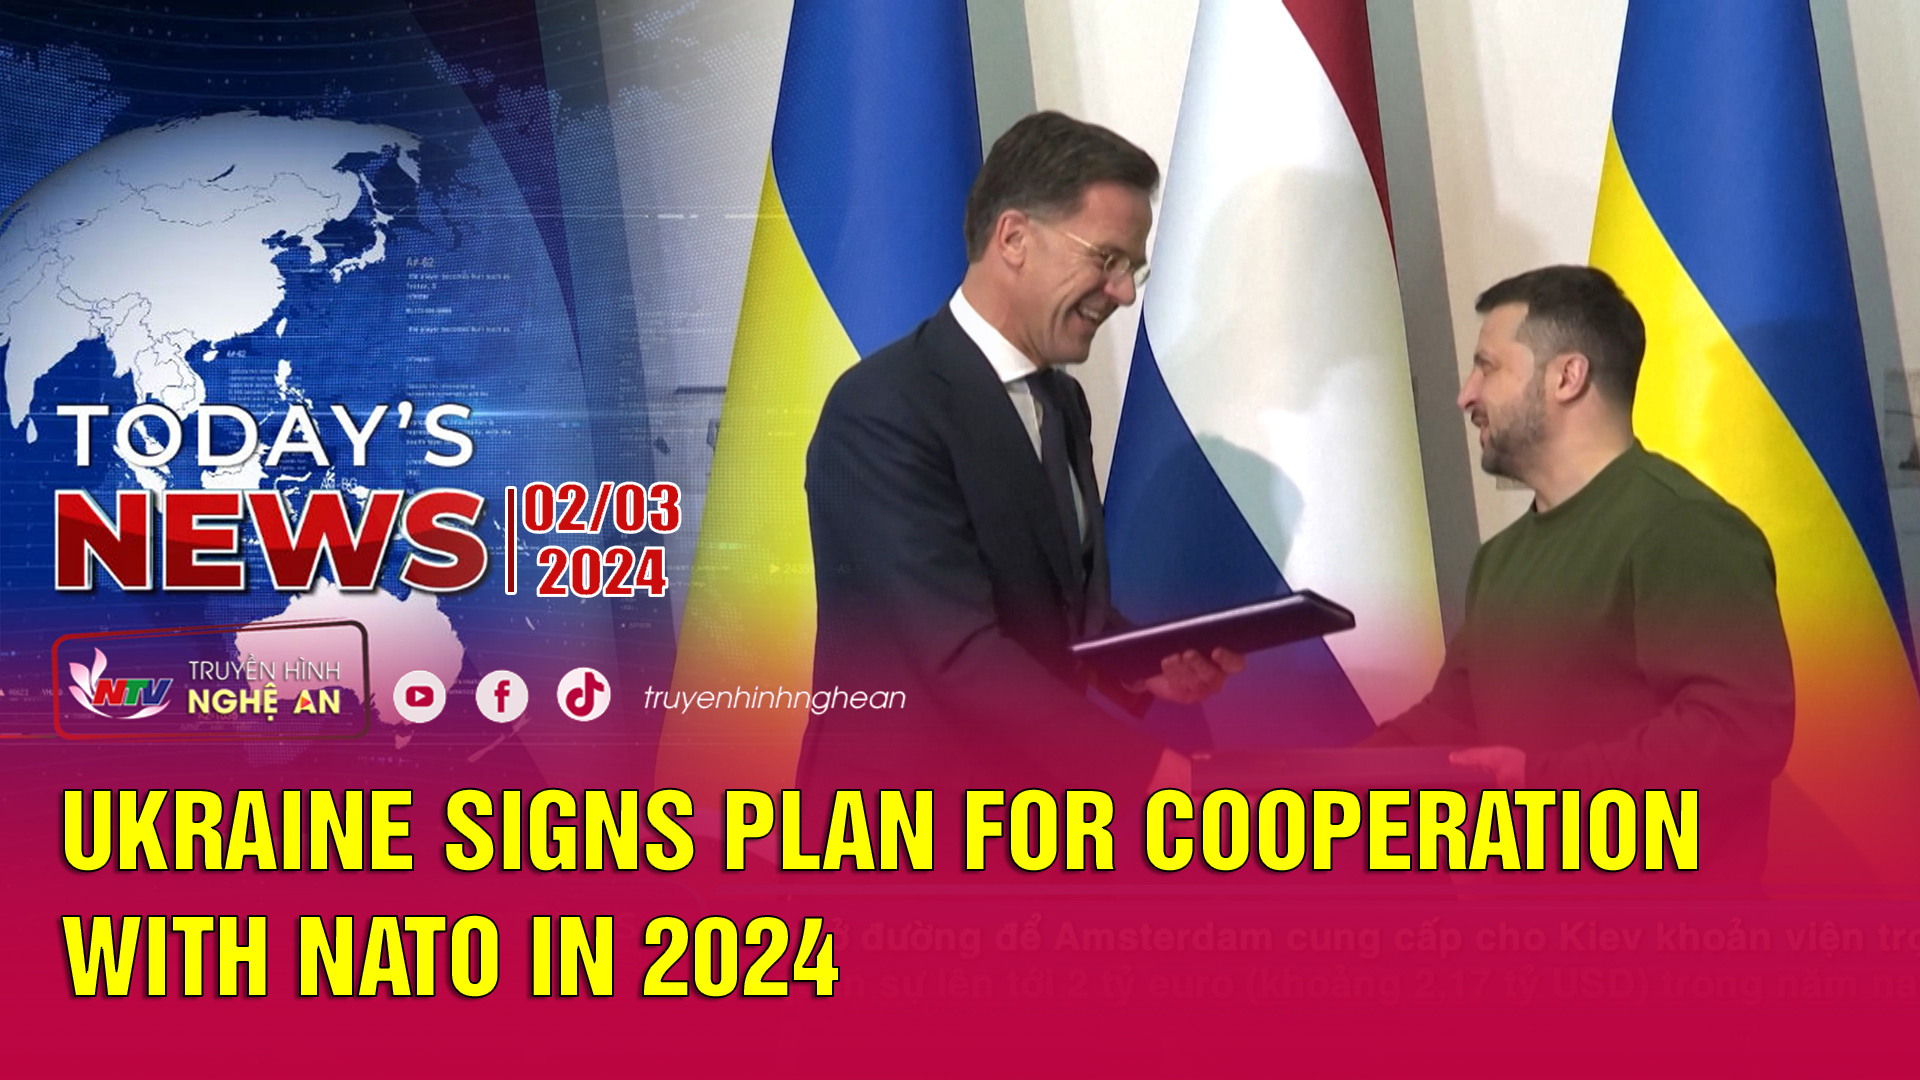 Today's News 02/03/2024: Ukraine signs plan for cooperation with NATO in 2024